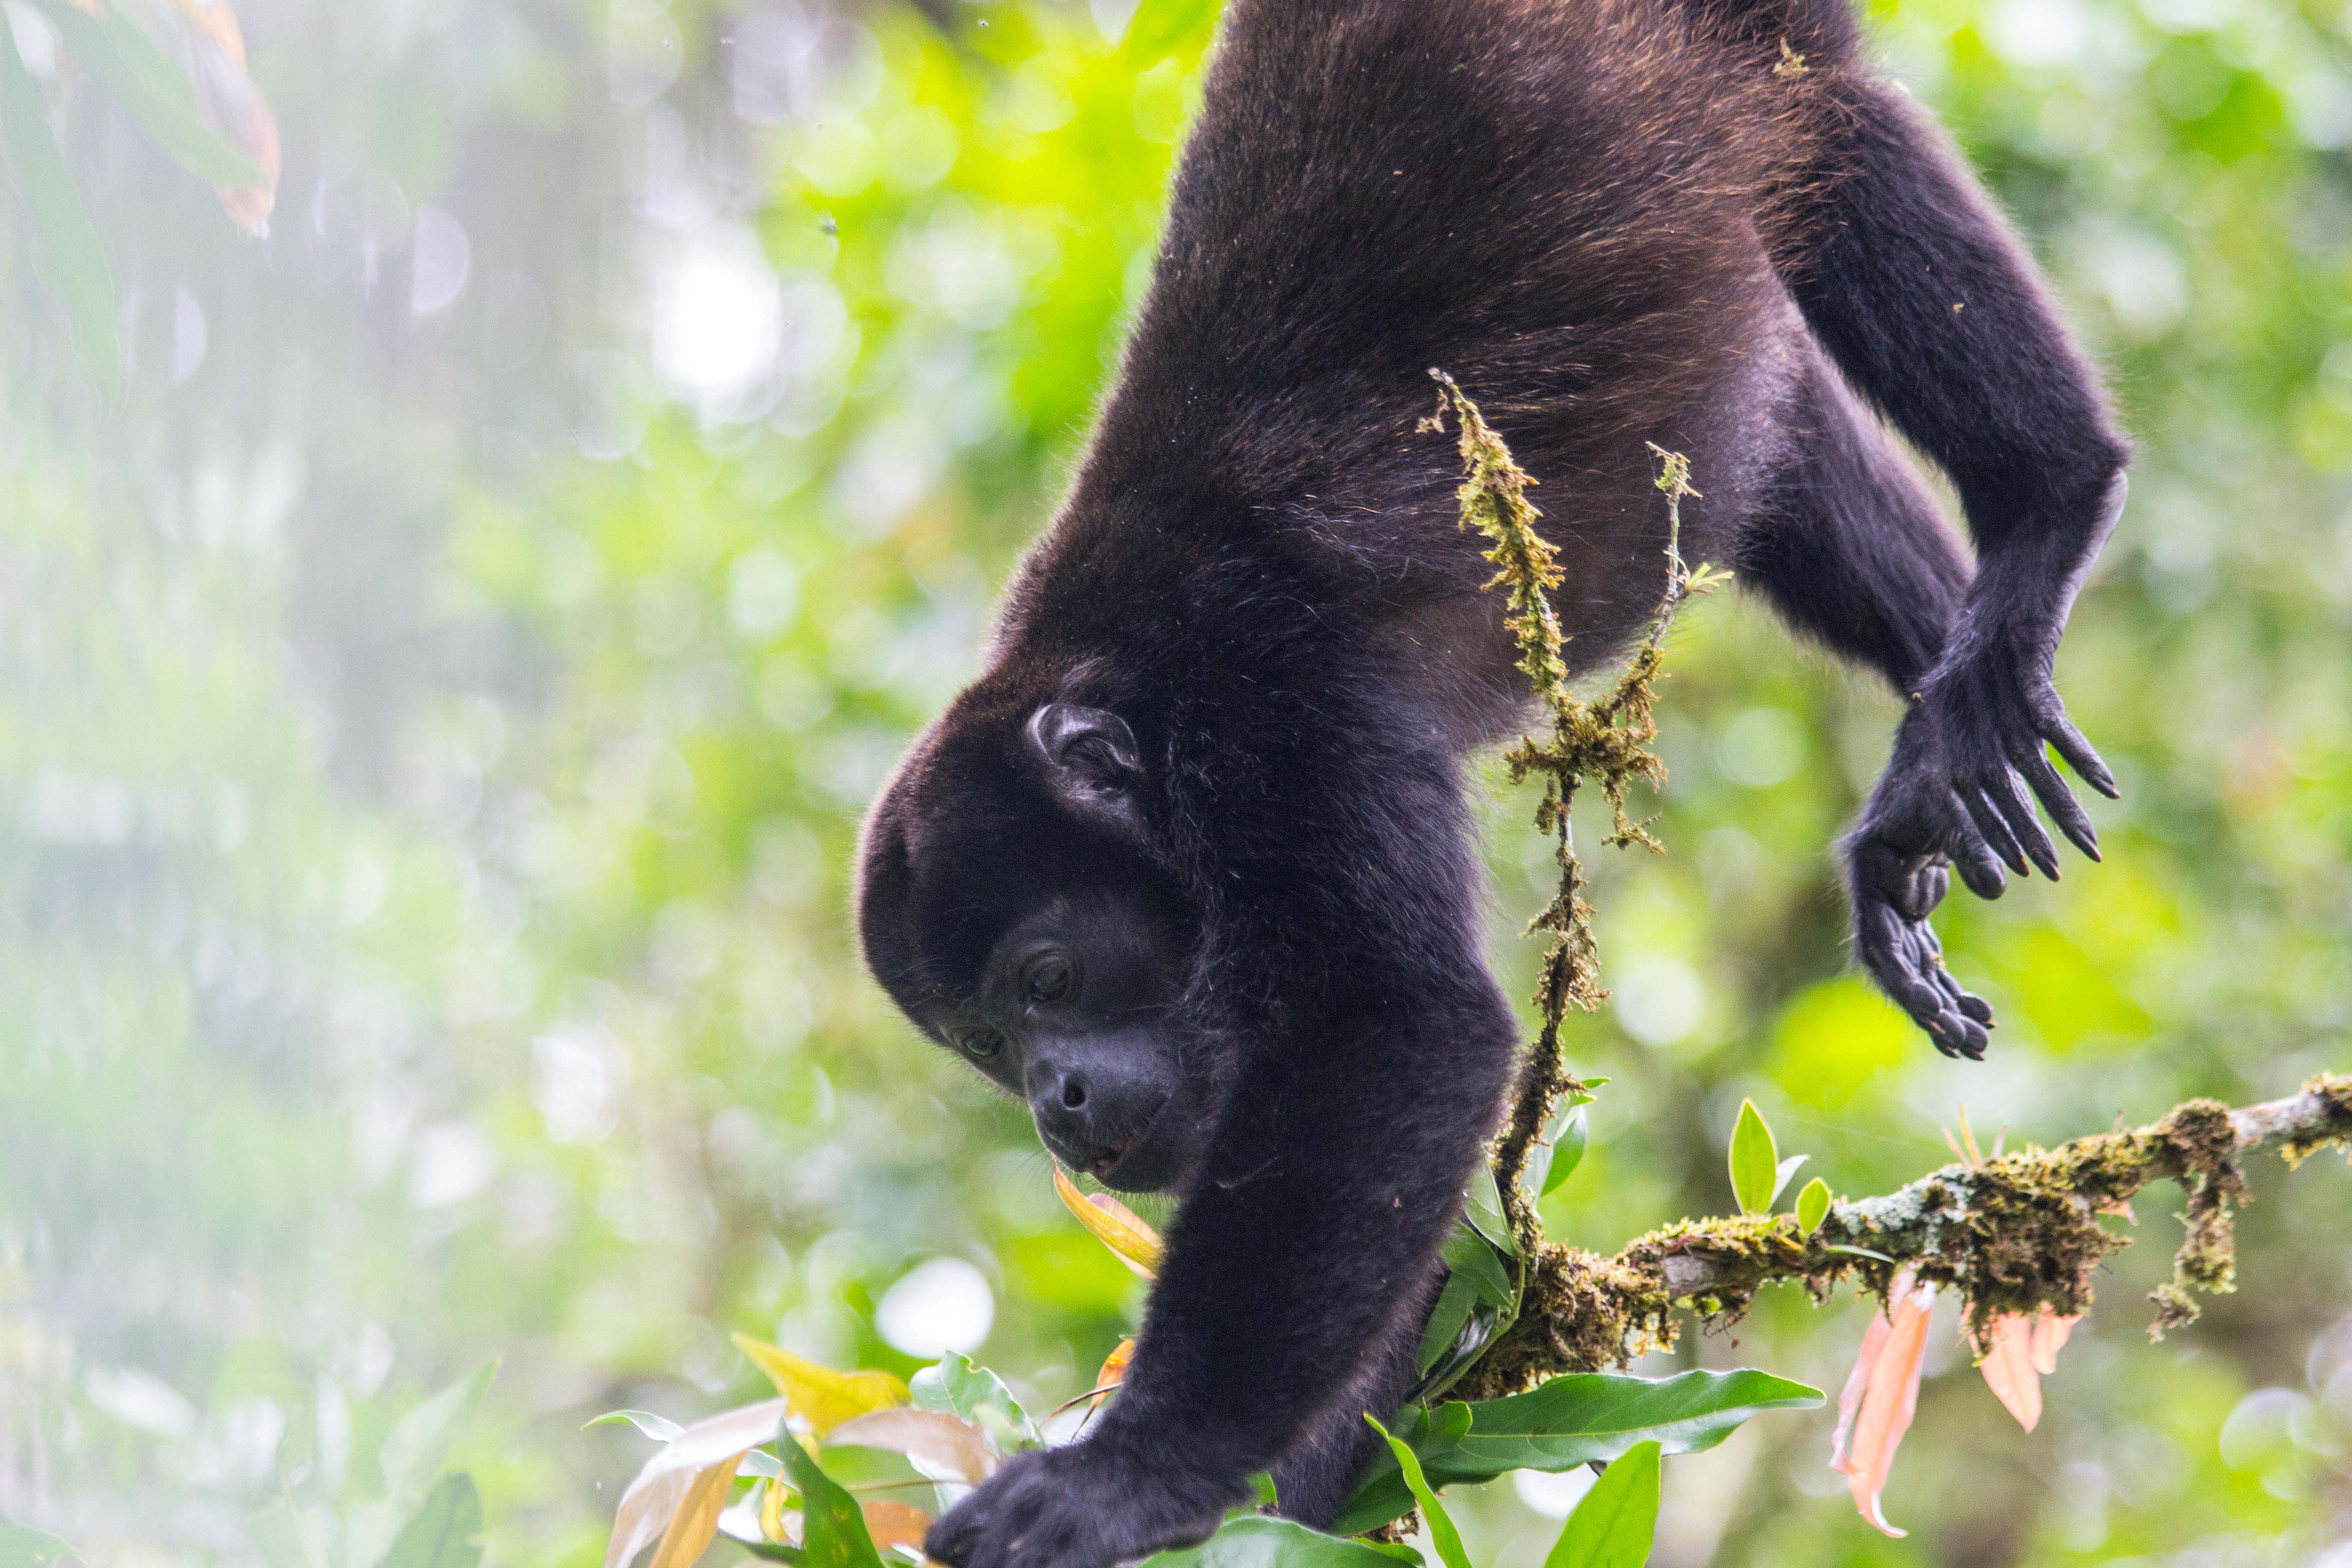 Howler monkey hanging from a tree and eating by Stefanie Kaupa